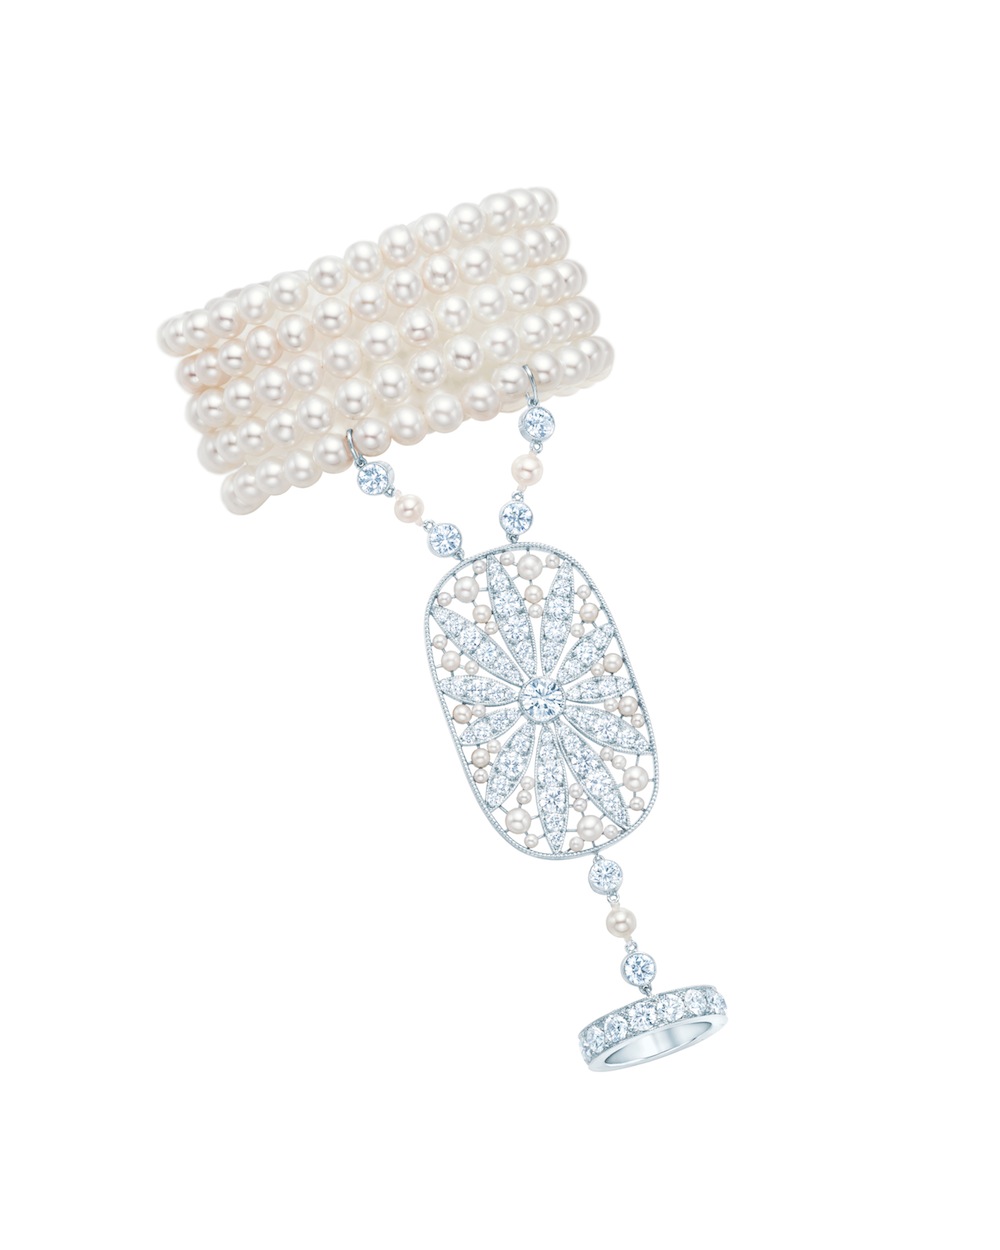 The Great Gatsby Collection Daisy Hand Ornament